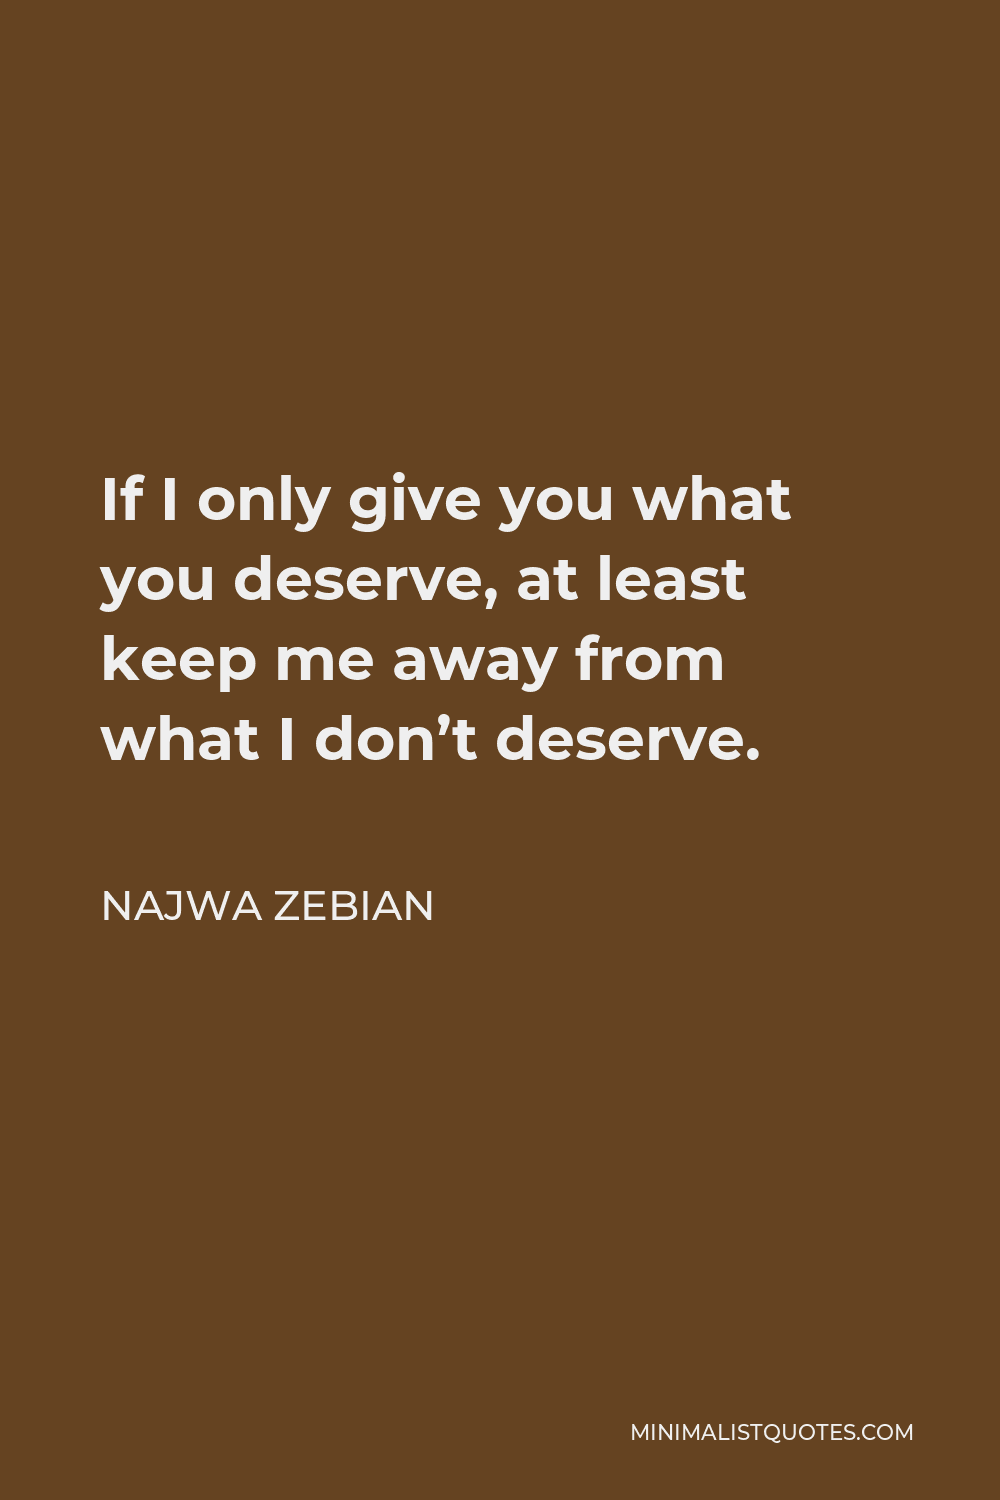 Najwa Zebian Quote - If I only give you what you deserve, at least keep me away from what I don’t deserve.